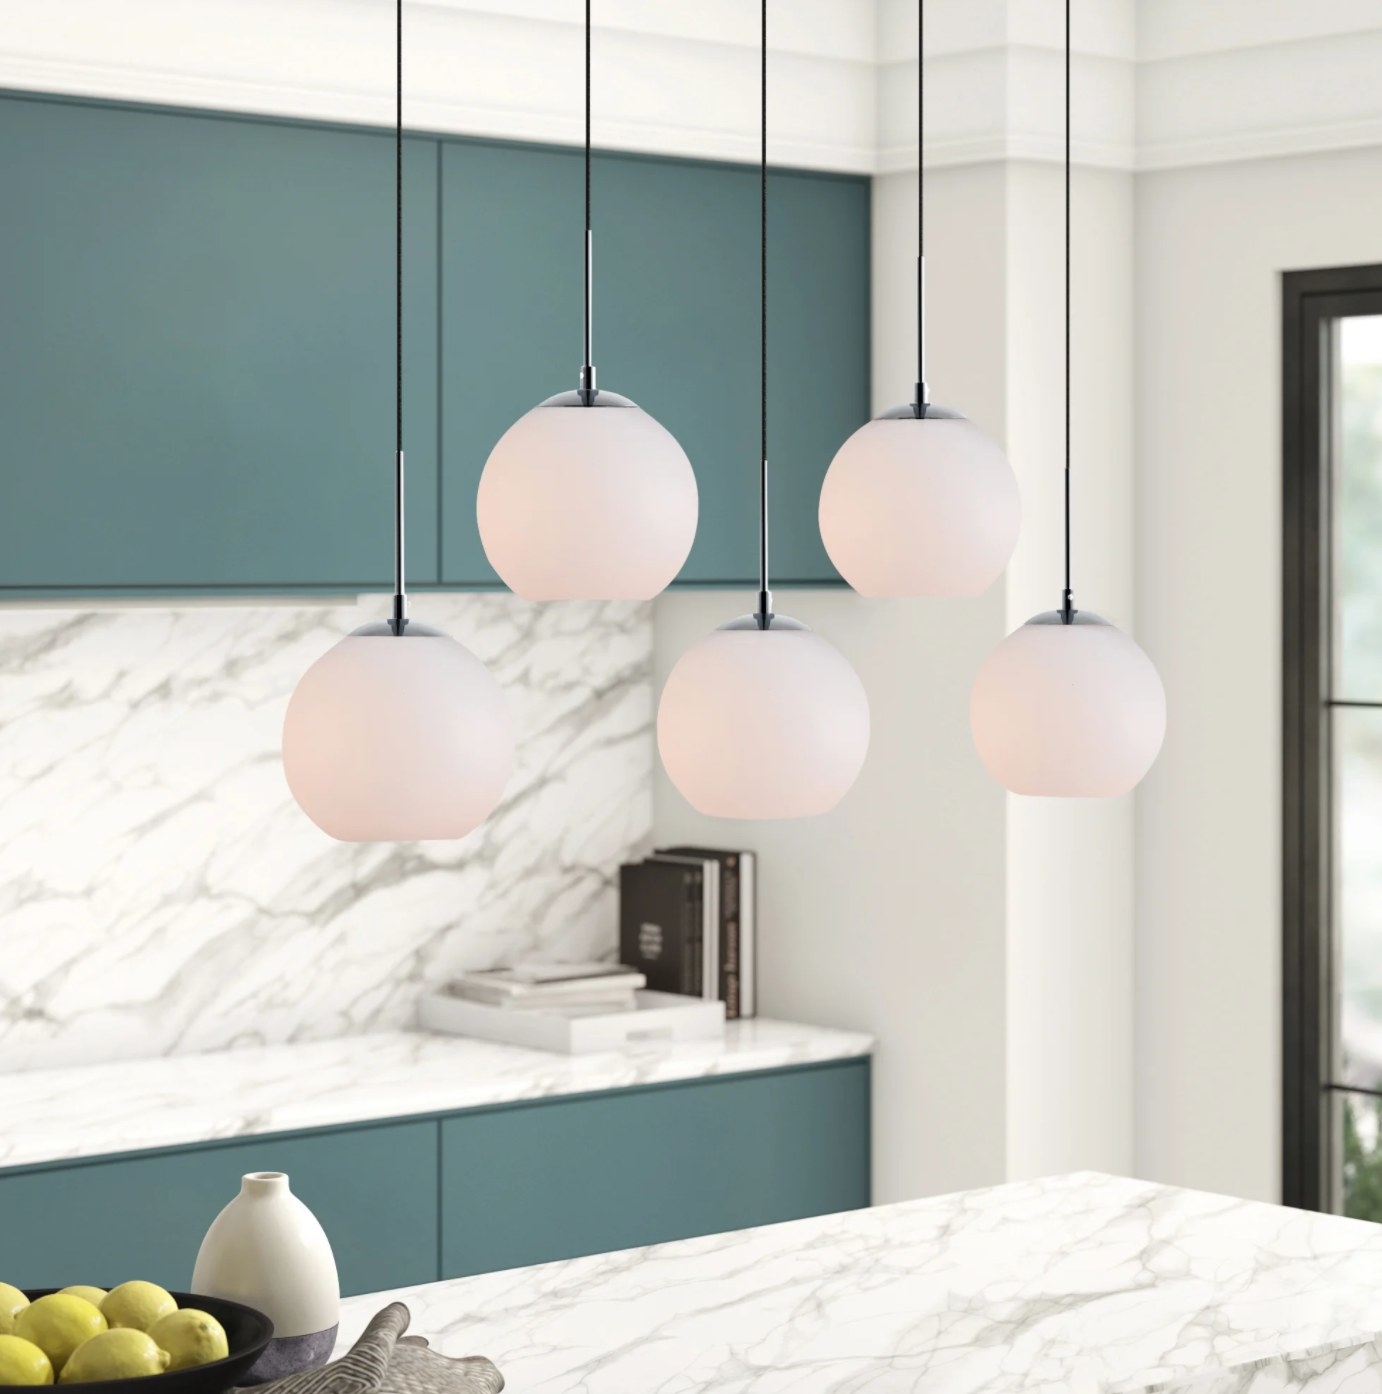 the globe light fixtures with frosted white outsides hanging above a marble countertop